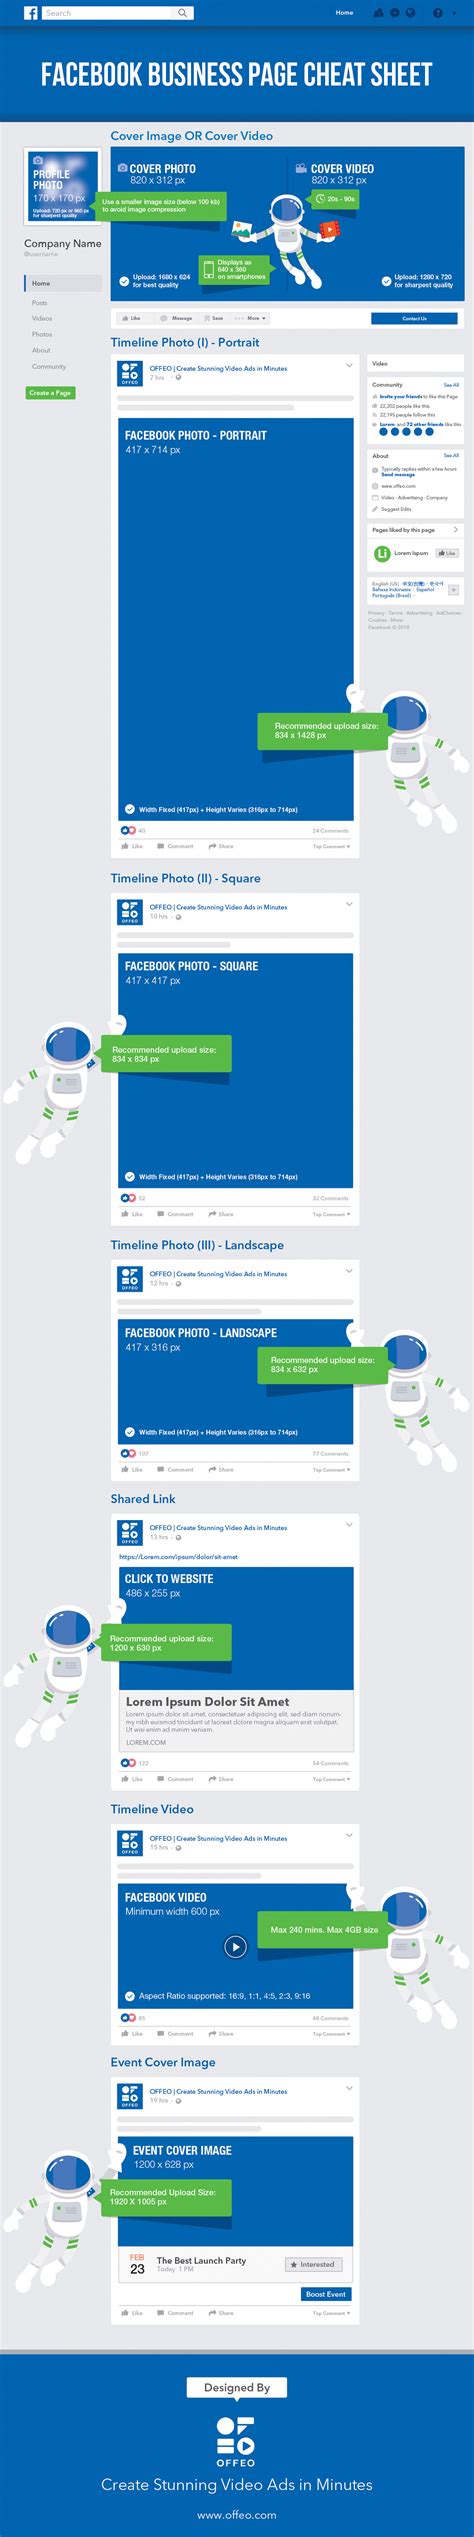 Facebook Cheat Sheet For Business Pages Infographic